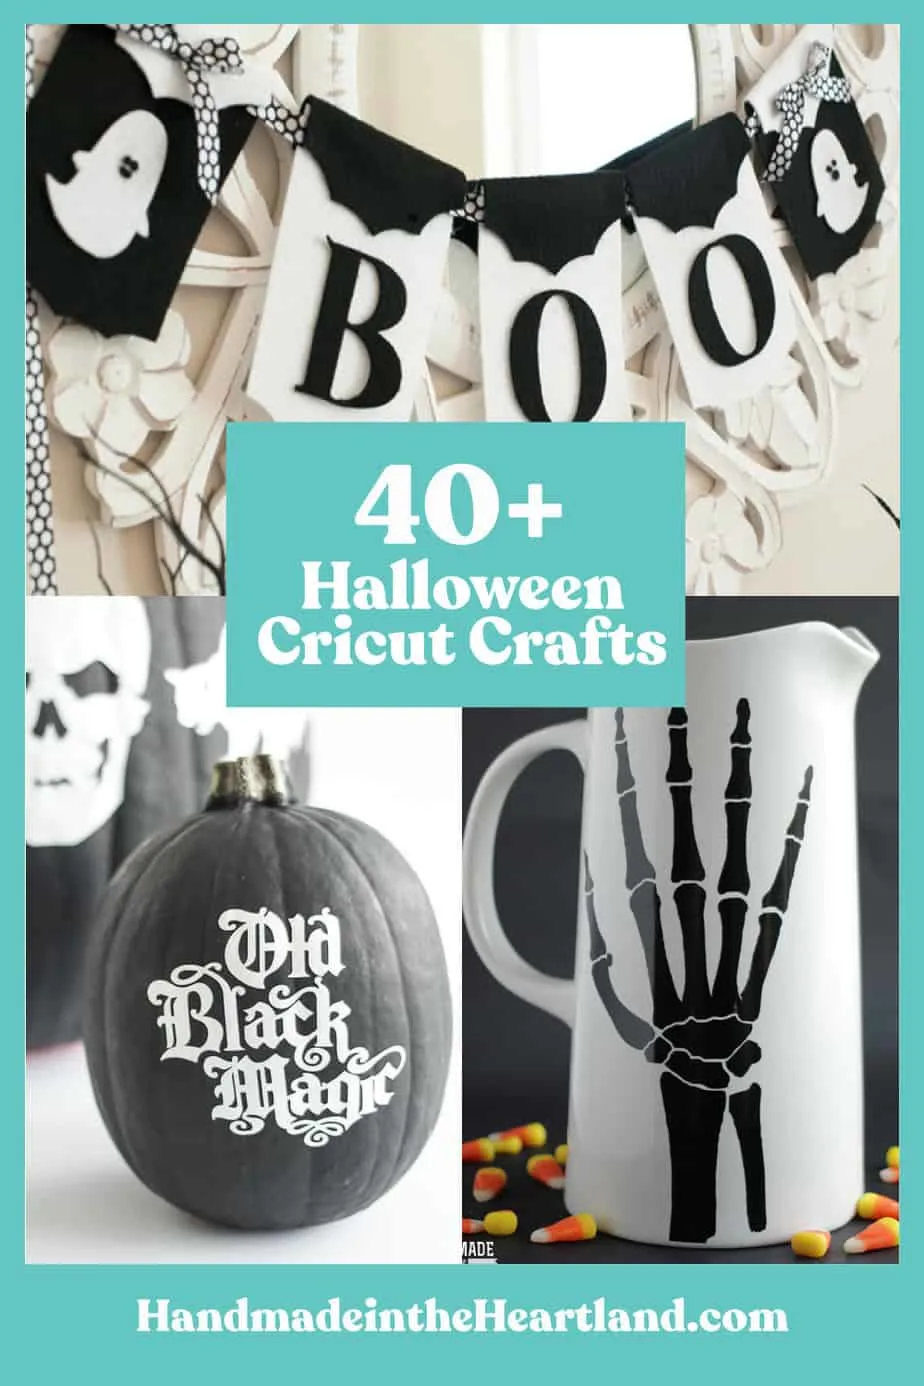 Craft Supplies for Cricut and Silhouette crafting from the Dollar Tree